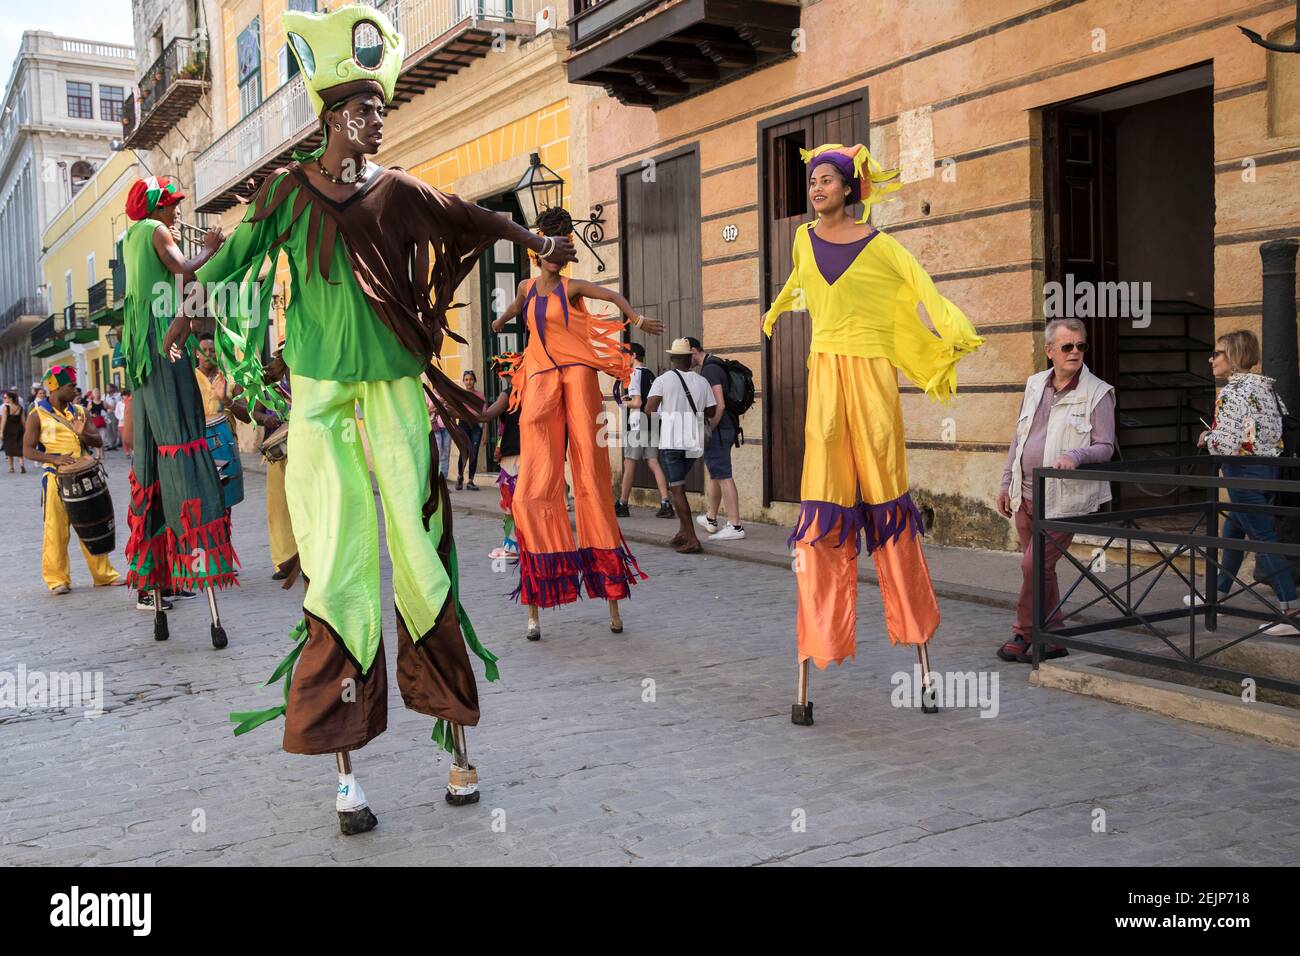 Street performers on stilts in colorful costumes in Old Havana, Cuba. Stock Photo